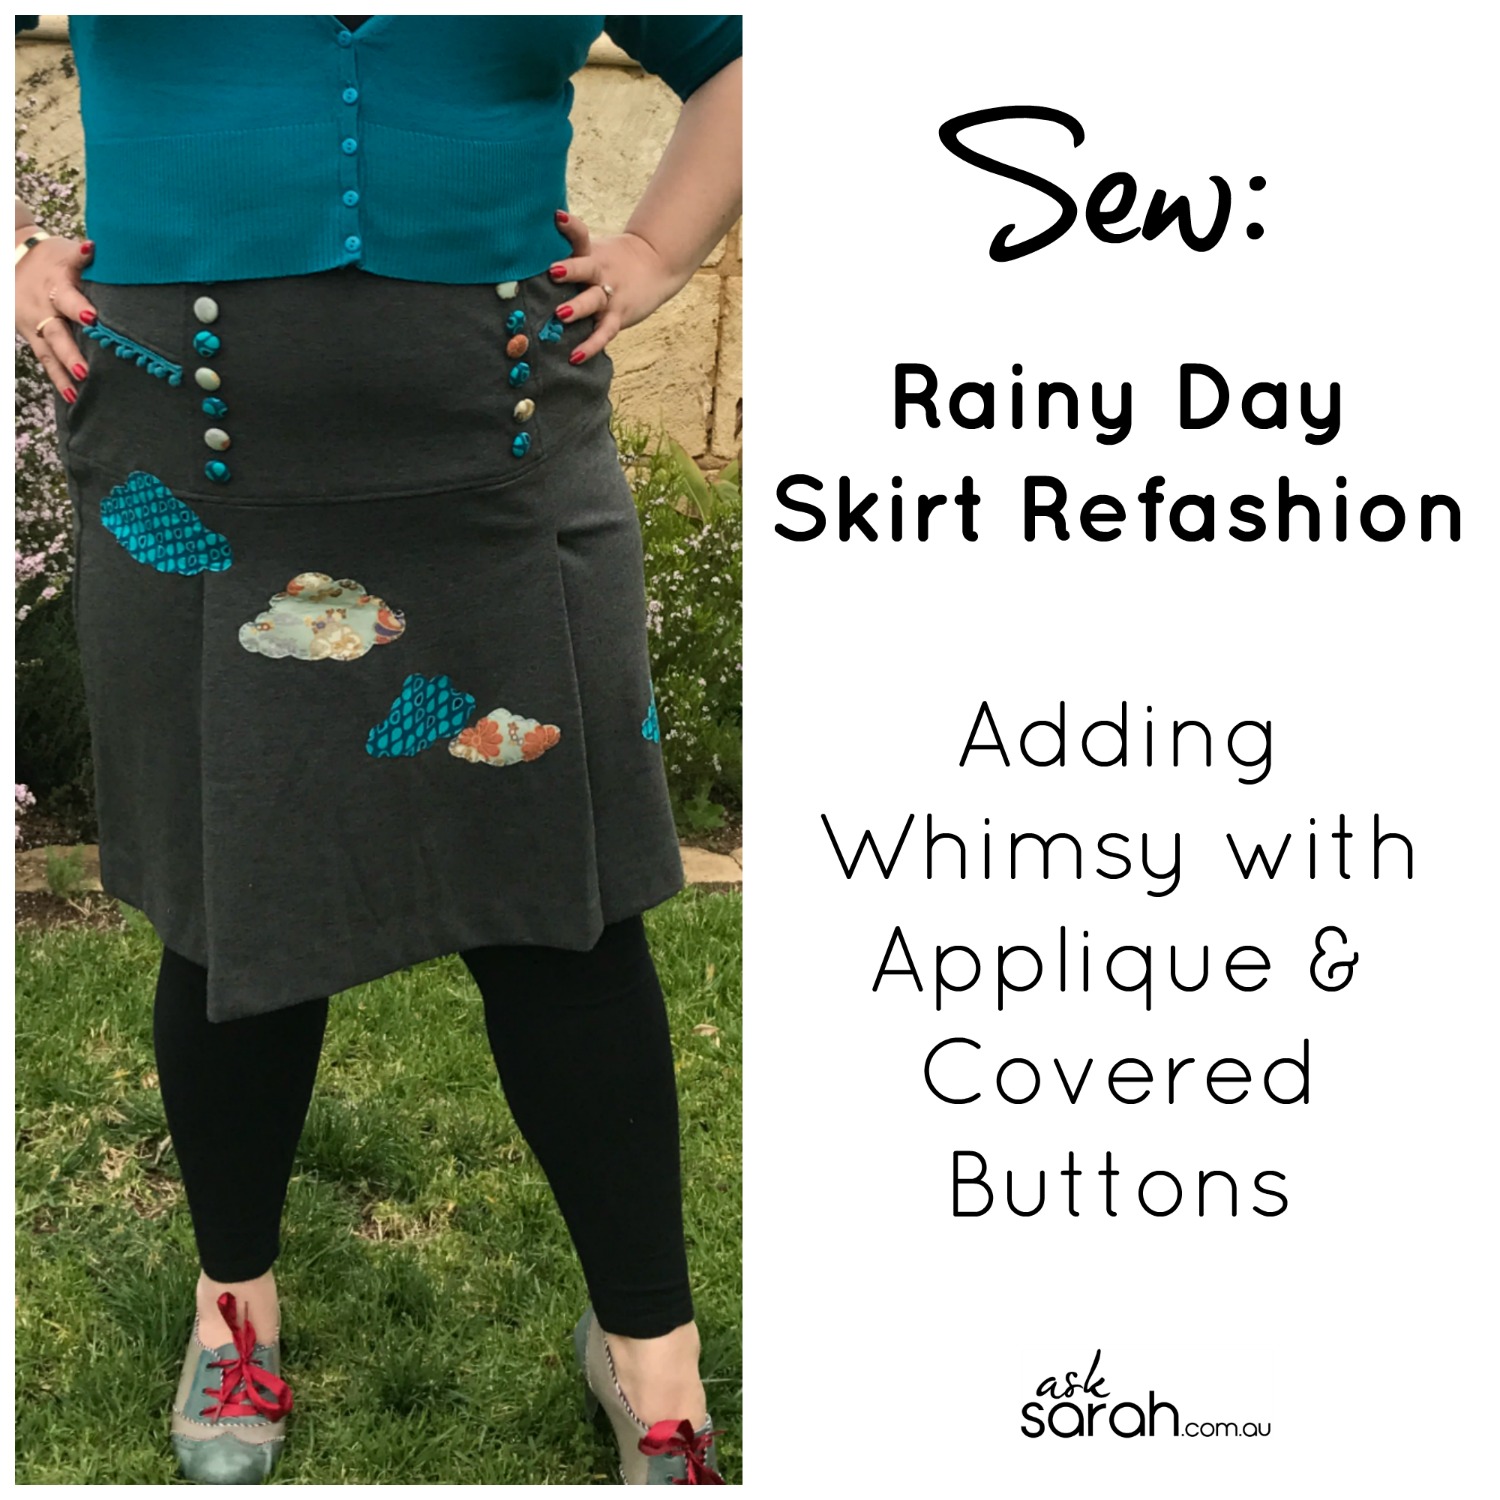 Sew: Rainy Day Skirt Refashion {Adding Whimsy with Applique & Covered Buttons}